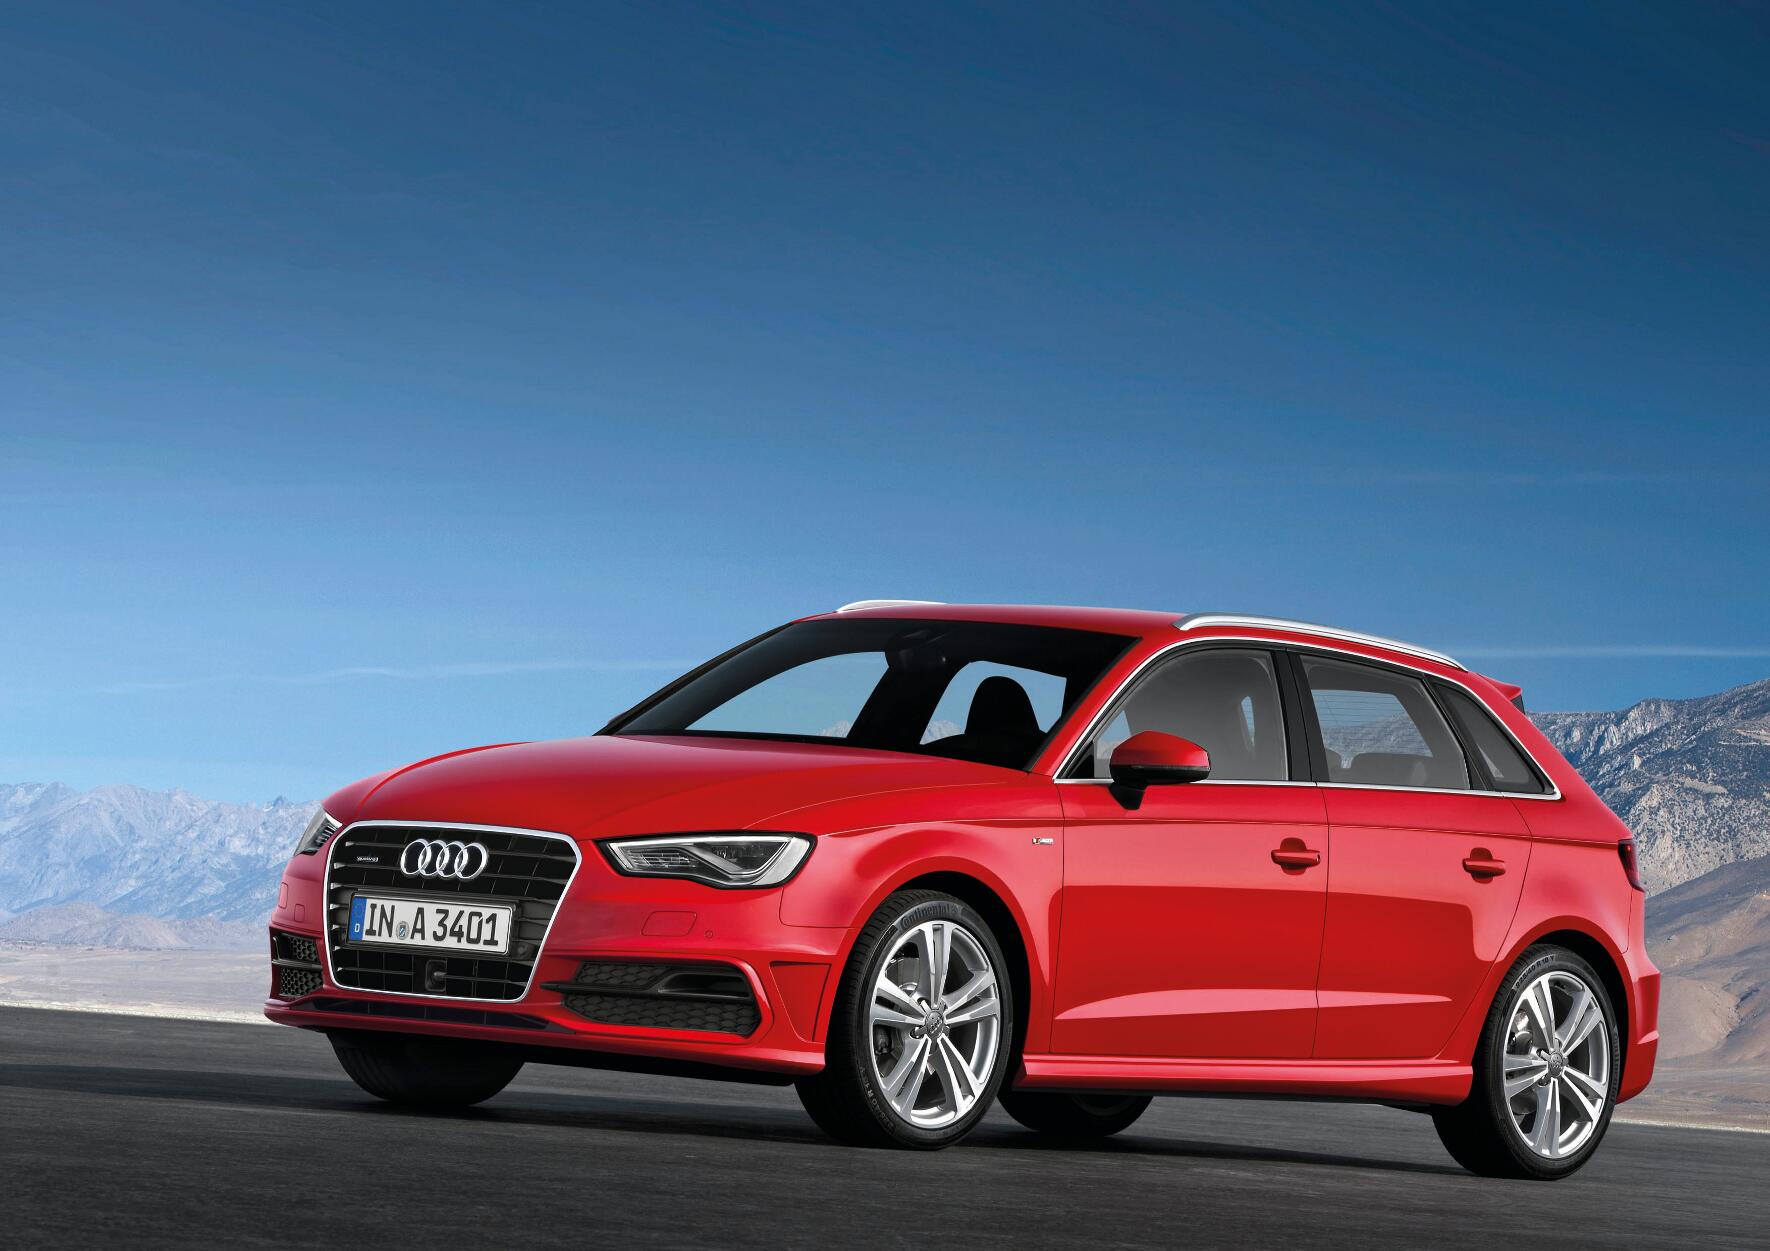 u-s-to-get-new-audi-a3-sportback-as-well-as-a3-sedan-report